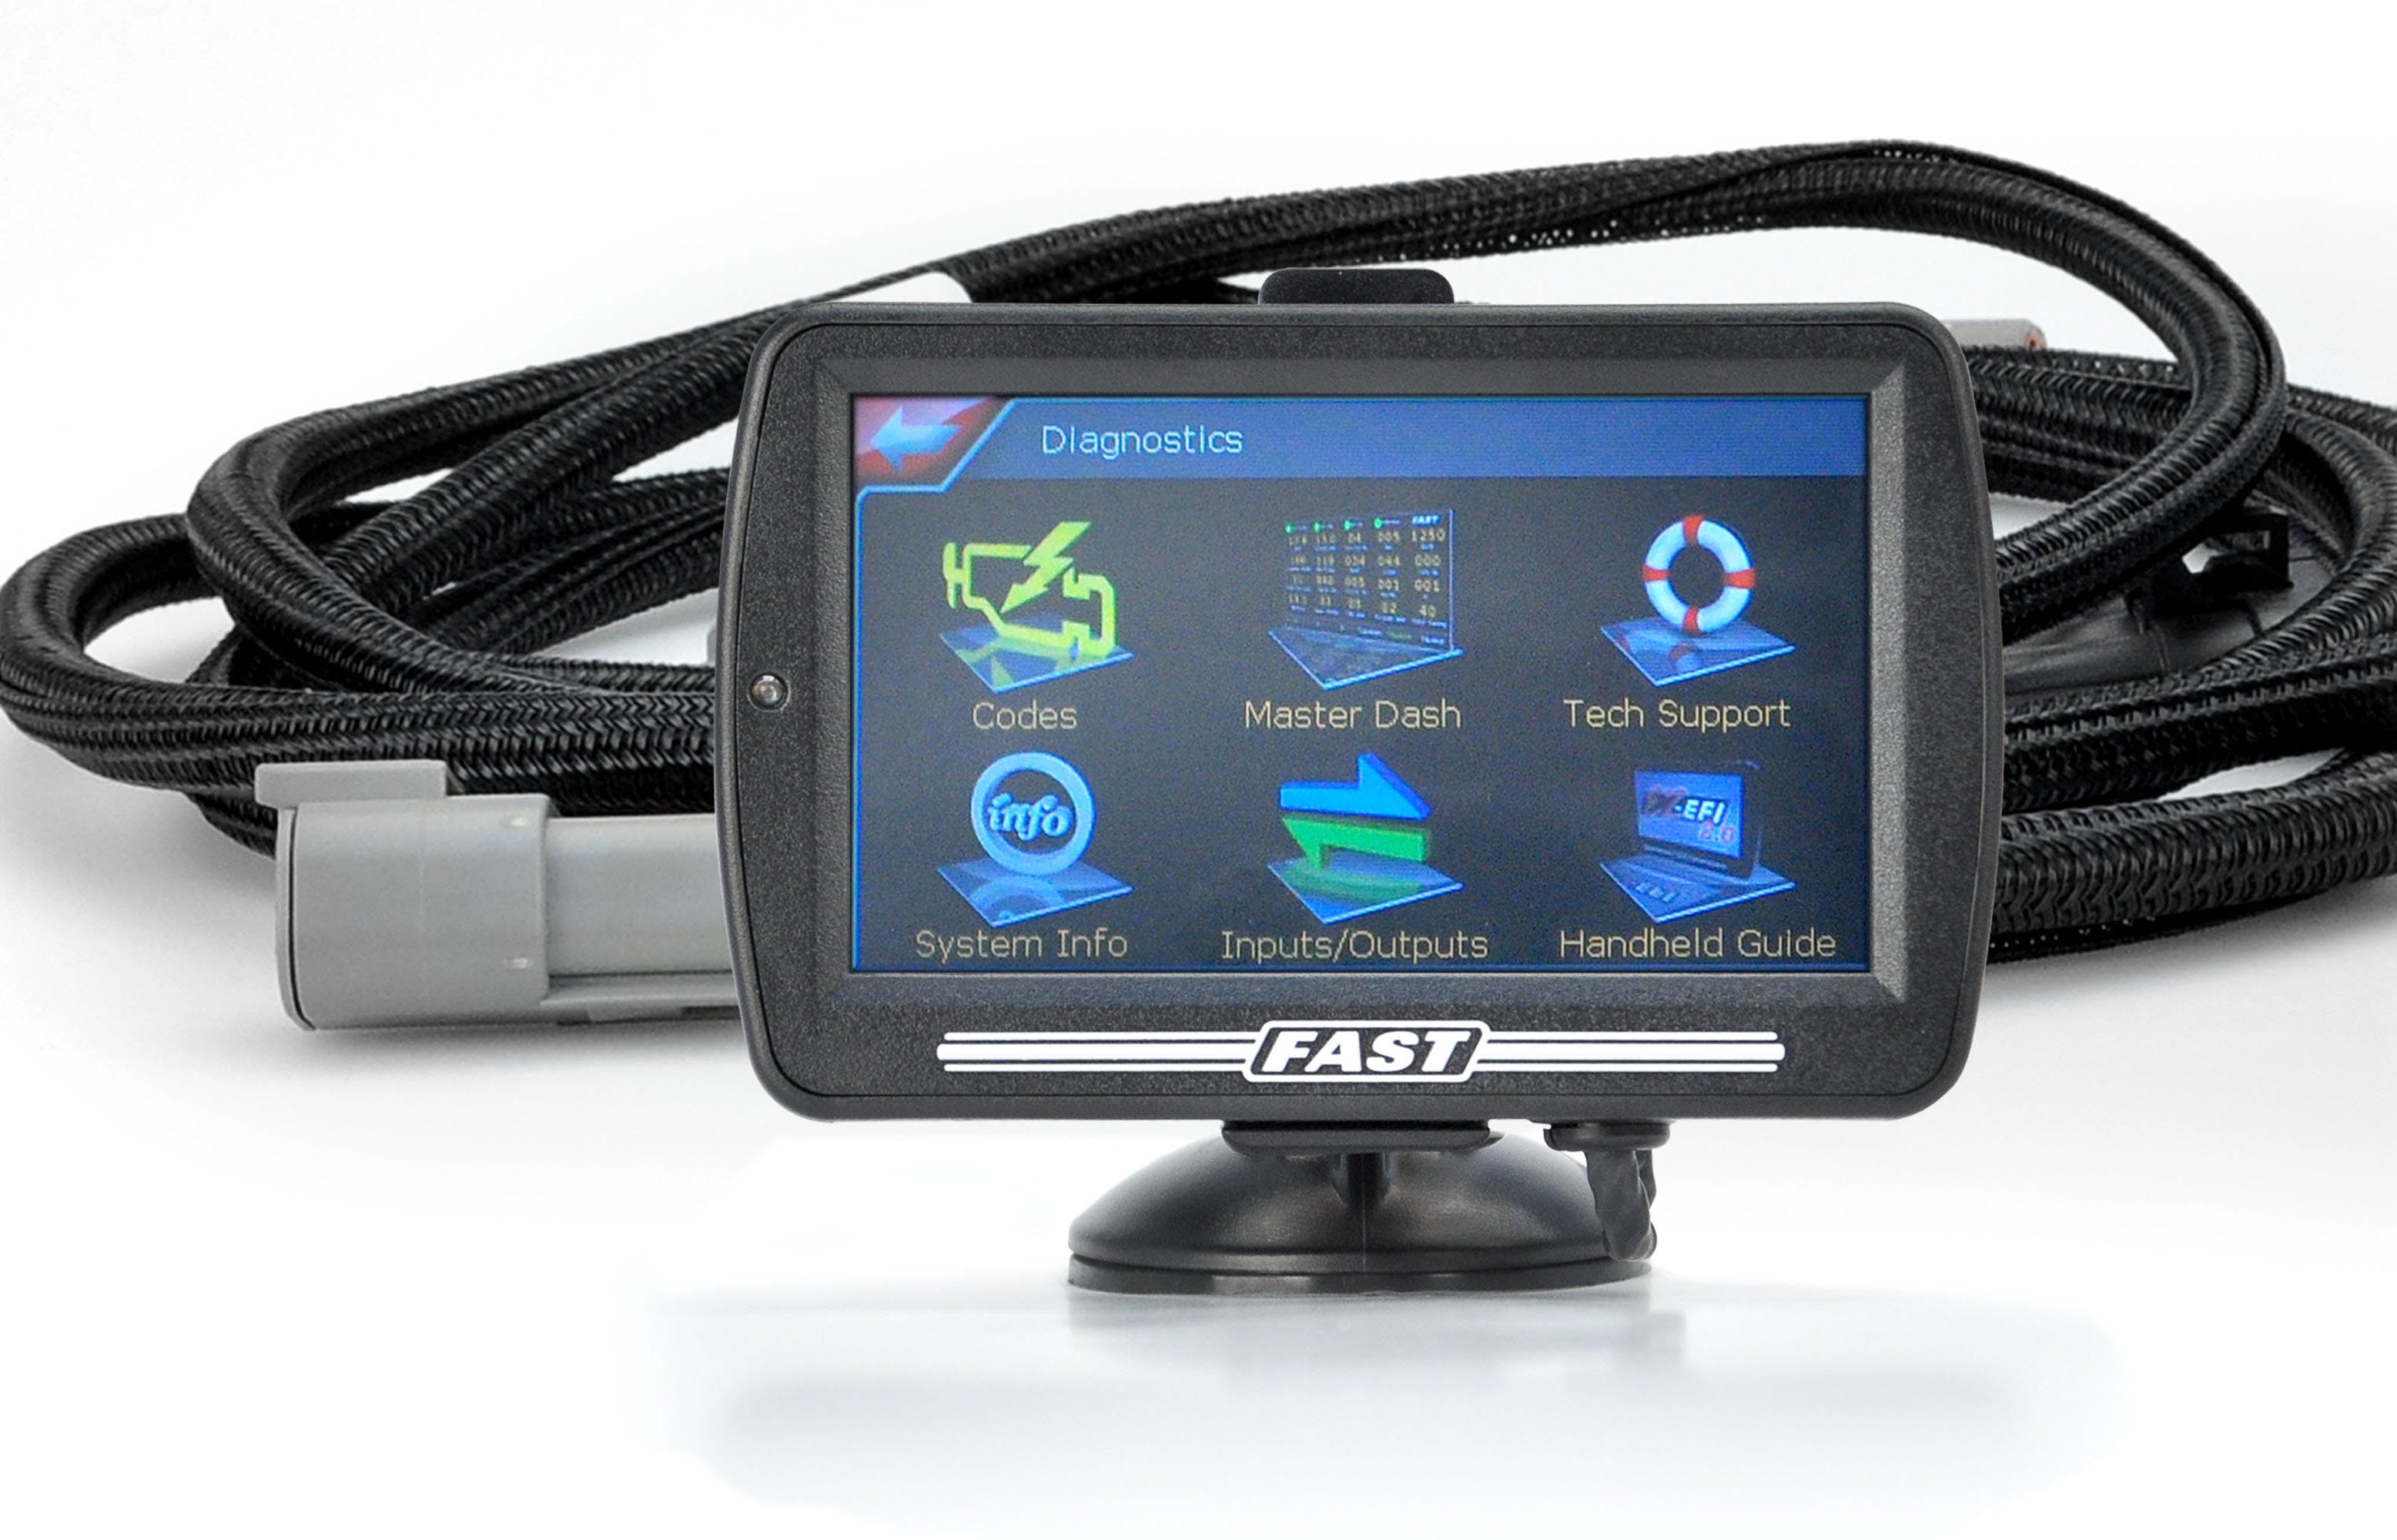 FAST - Fuel Air Spark Technology 170633-06KIT EZ Fuel Touchscreen Hand-Held